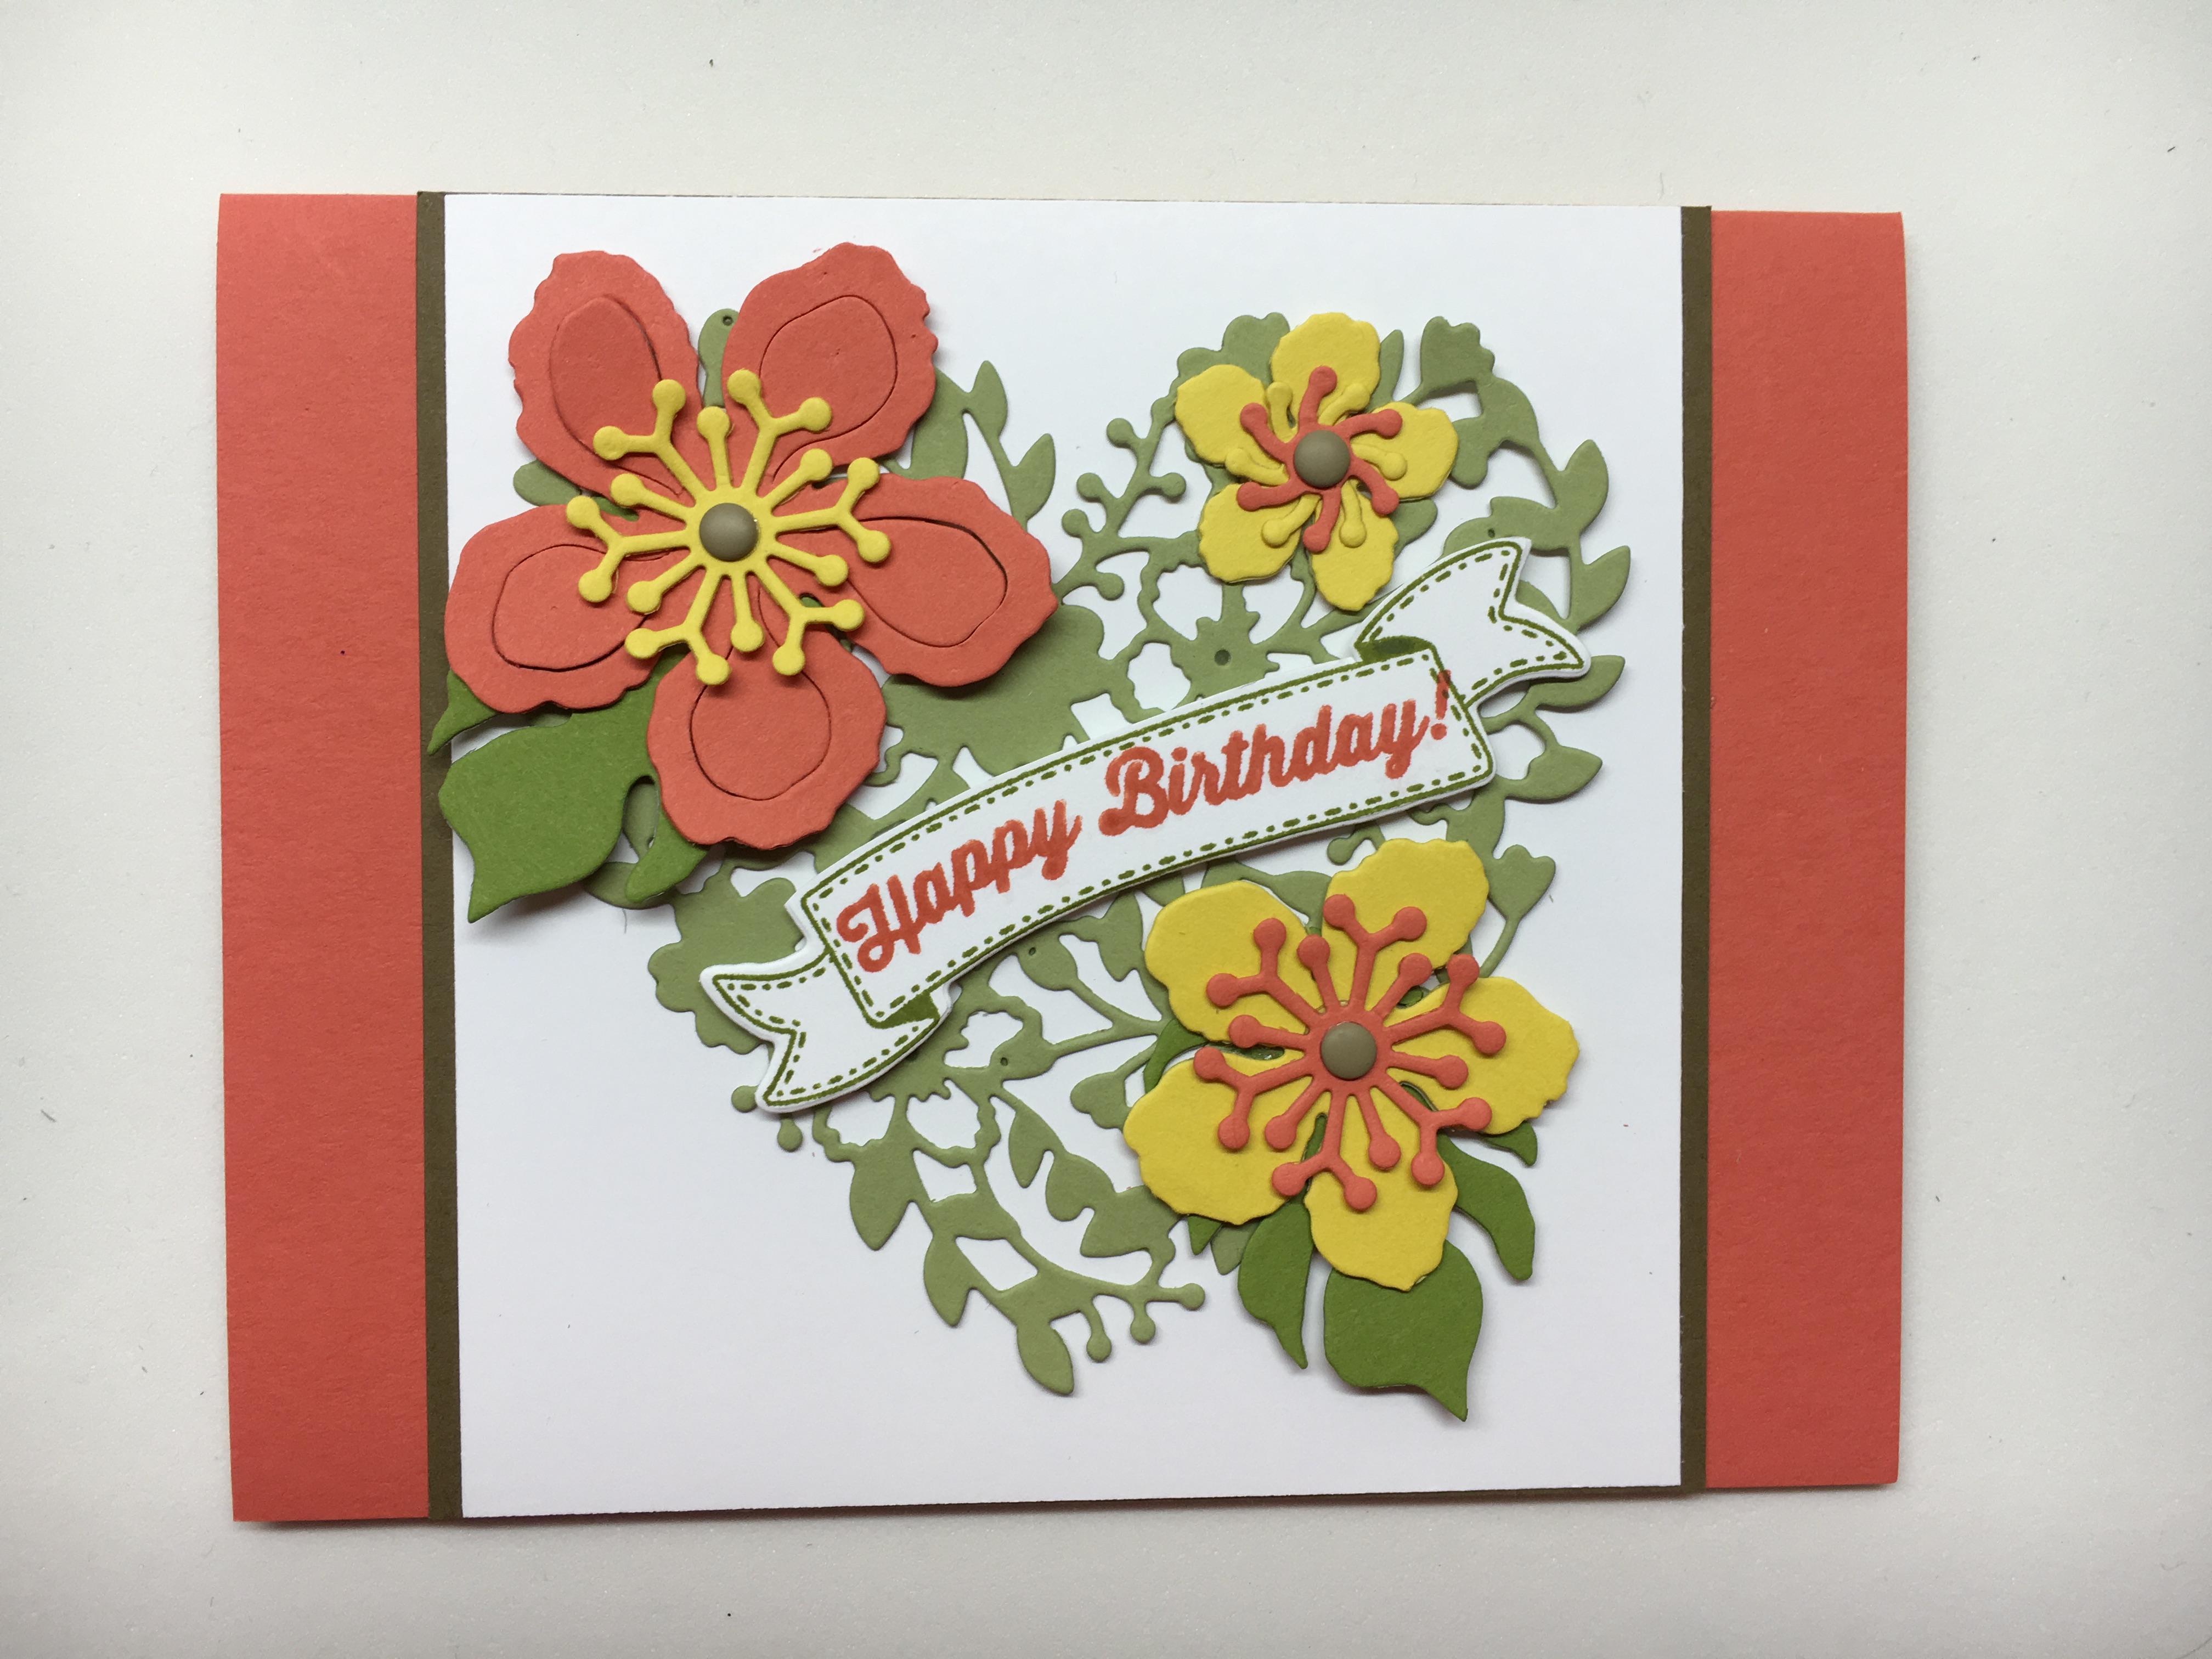 Stampin Up Birthday card idea using Bloomin Heart THinlints, Botanical Builder Framelits, Bunch of Banners Framlelits - Jeanie Stark StampinUp